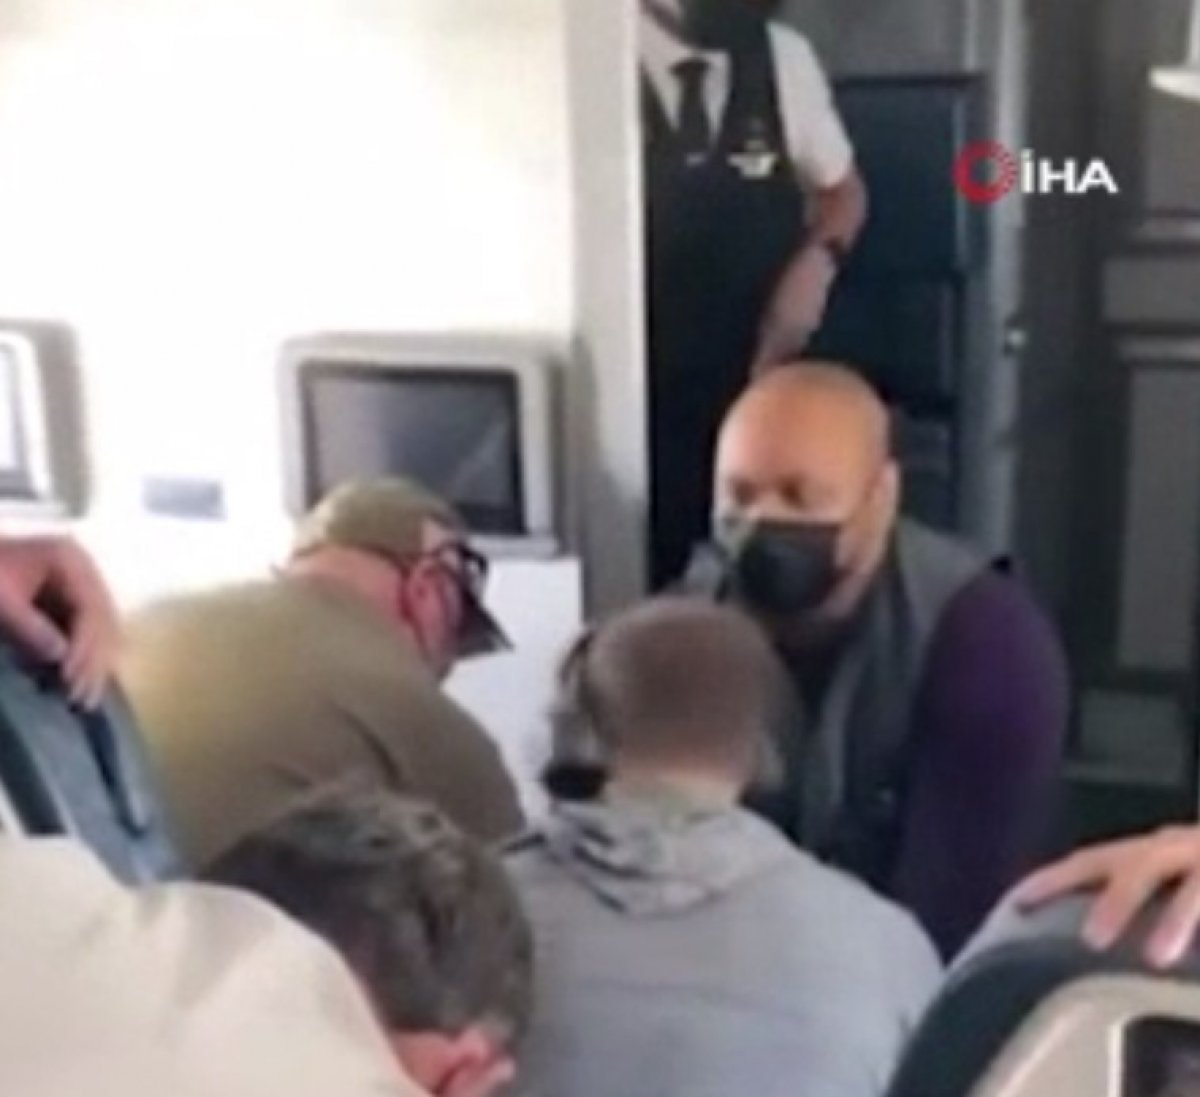 Passenger who tried to enter the cockpit in the USA was detained #1